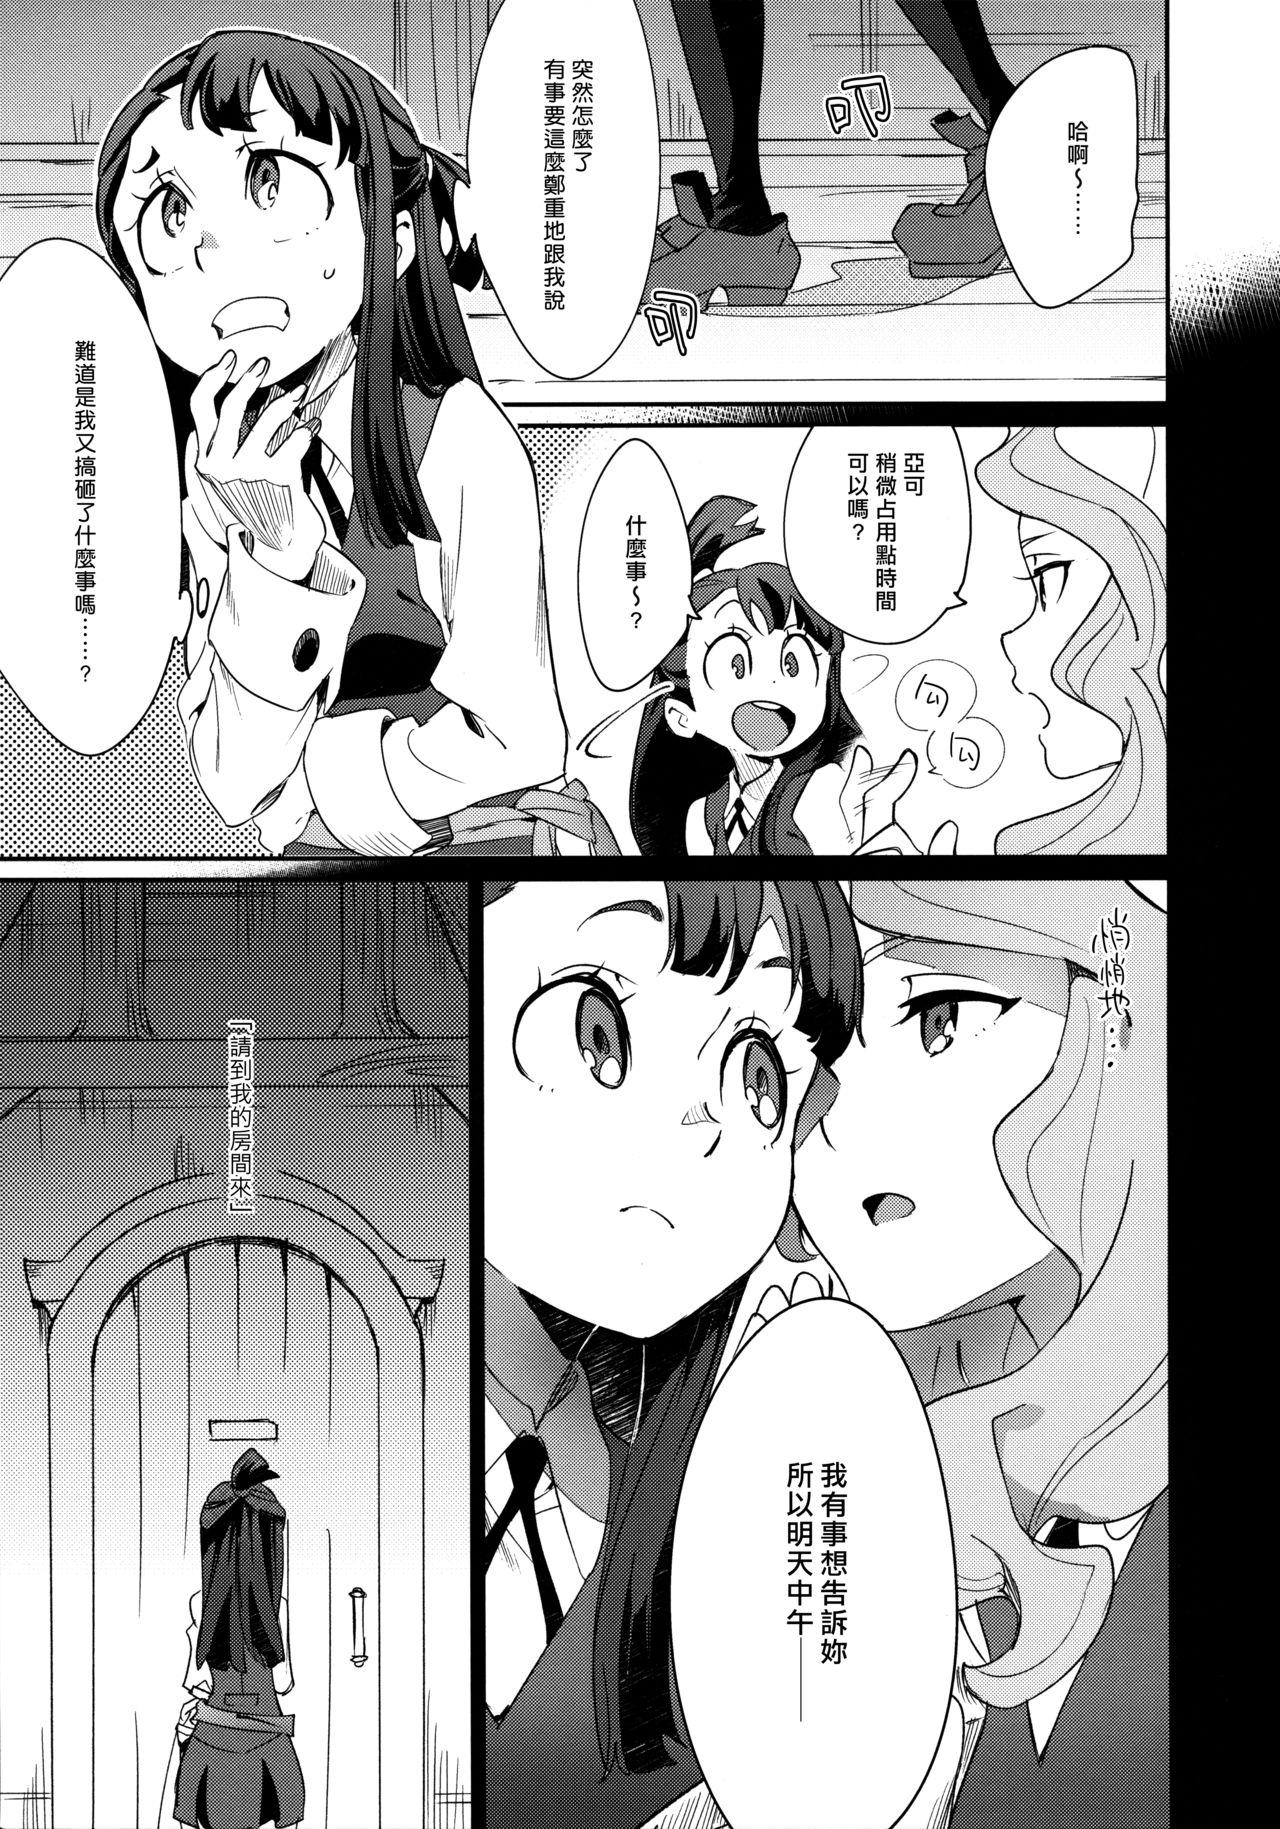 Hardcoresex xxx - Little witch academia College - Page 5